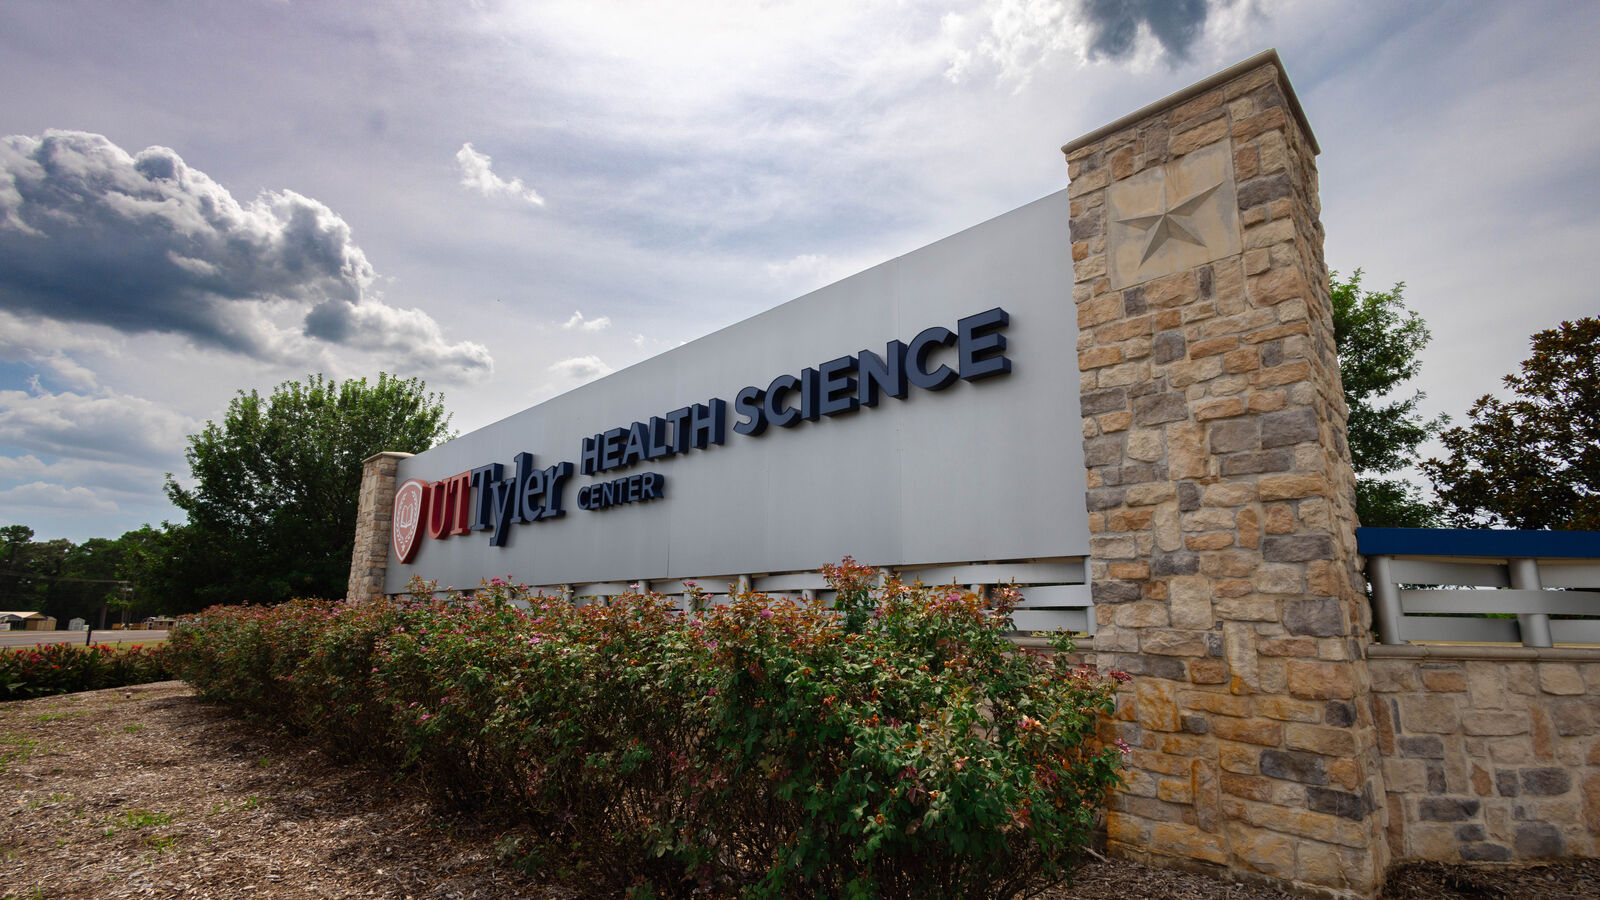 The exterior sign of the UT Tyler Health Science Center